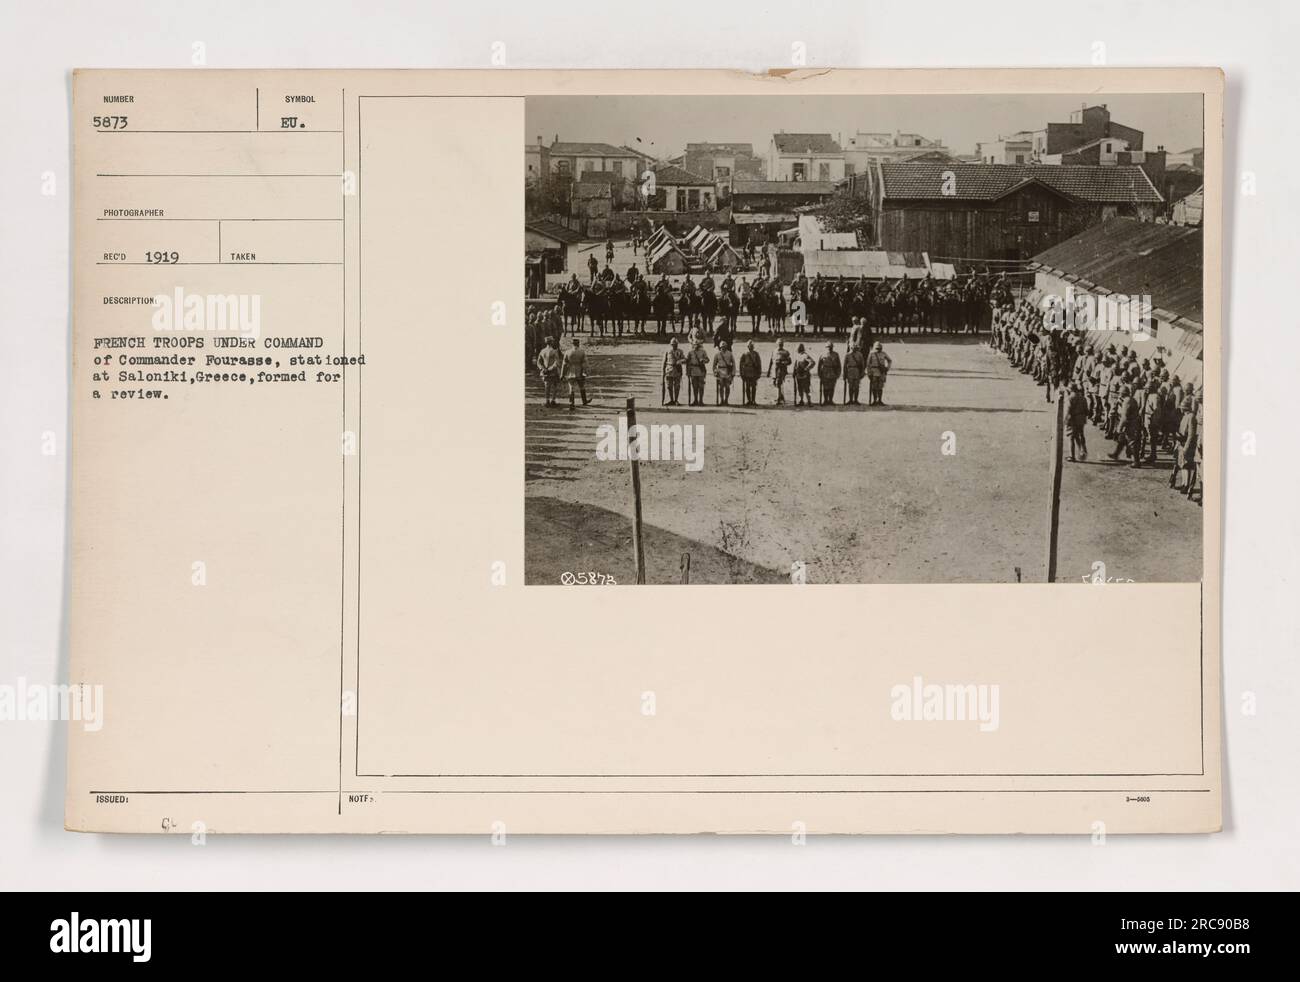 French troops under the command of Commander Fourasse, stationed at Saloniki, Greece, gather for a review. This photograph from 1919 documents the presence of French military forces during World War One. Stock Photo